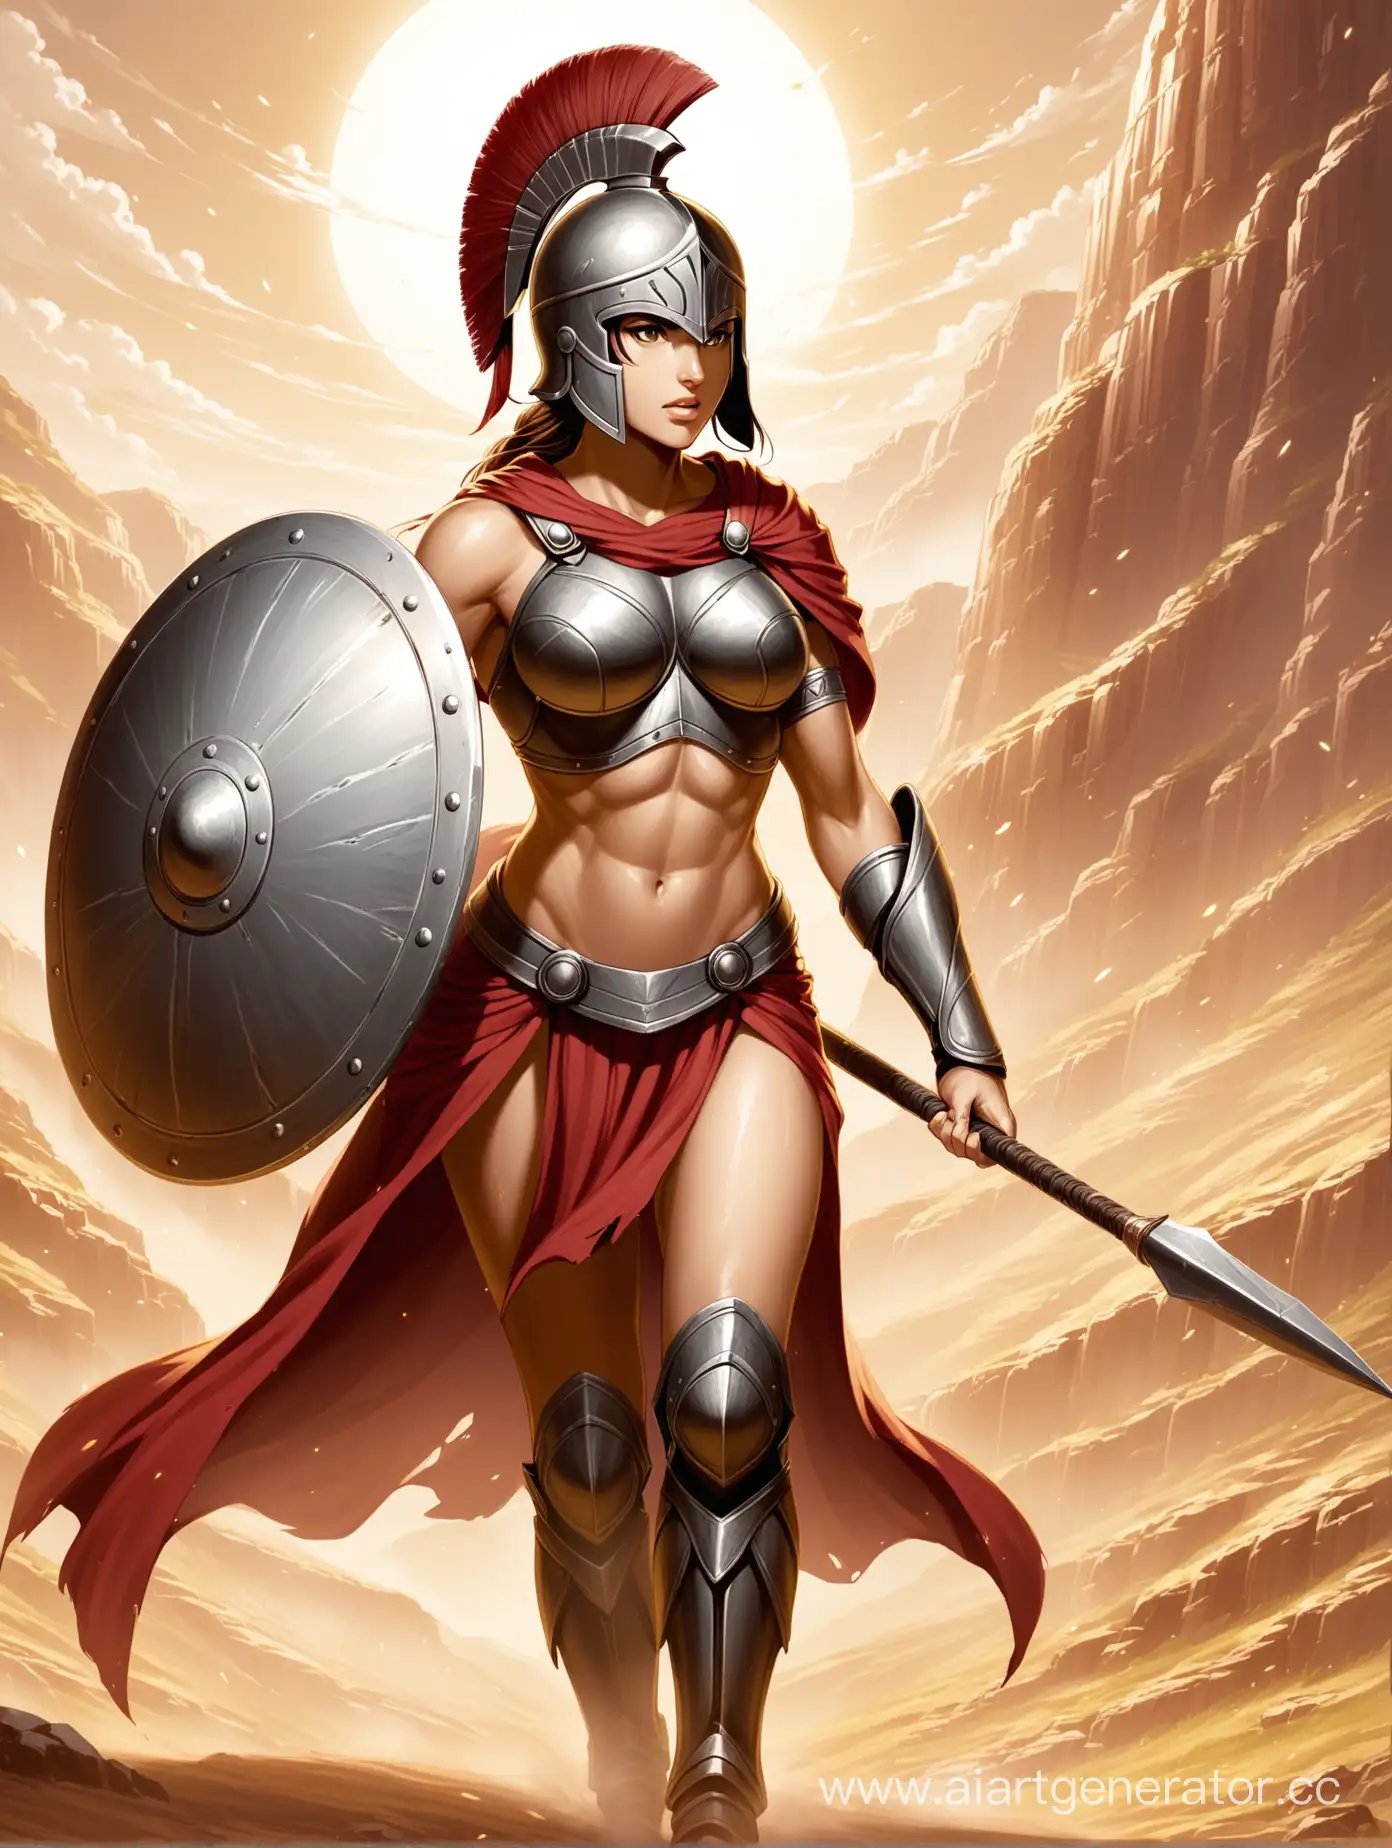 Young-Spartan-Warrior-Girl-with-Spear-and-Shield